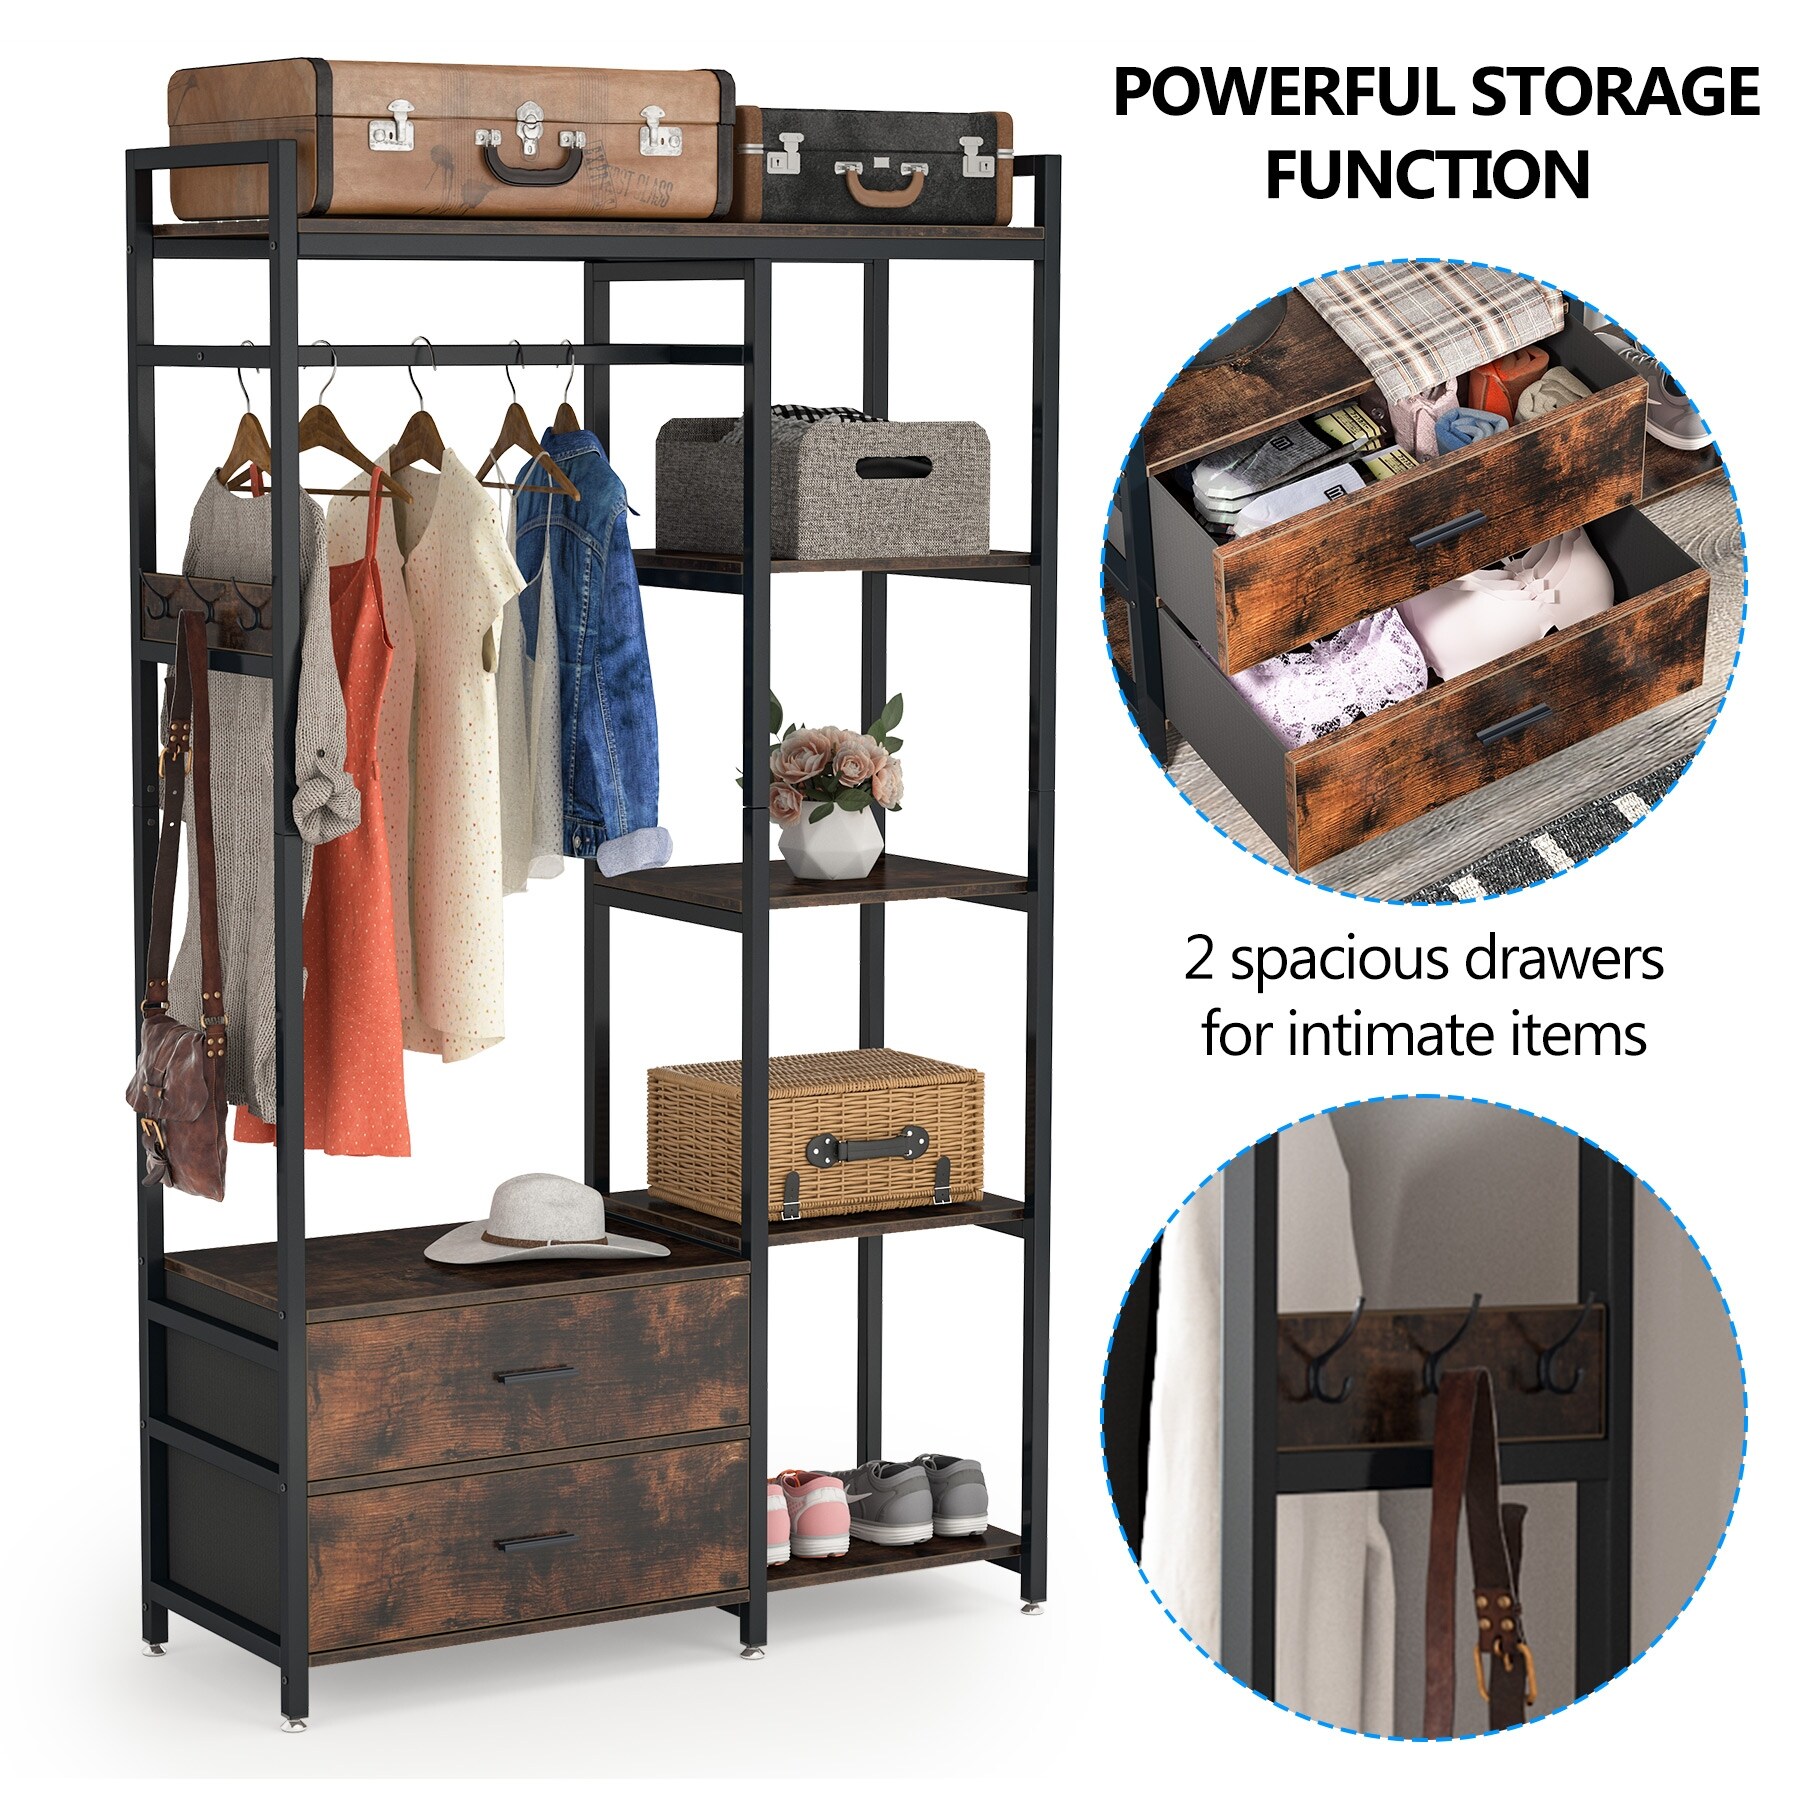 https://ak1.ostkcdn.com/images/products/is/images/direct/e6d1984d72888d4e5c8c64e351e67603f38253e3/Heavy-Duty-Garment-Rack-with-2-Drawers-Shelves%2C-Hanging-Rod%2C-Freestanding-Closet-Organizer%2C-Large-Open-Wardrobe-Closet.jpg